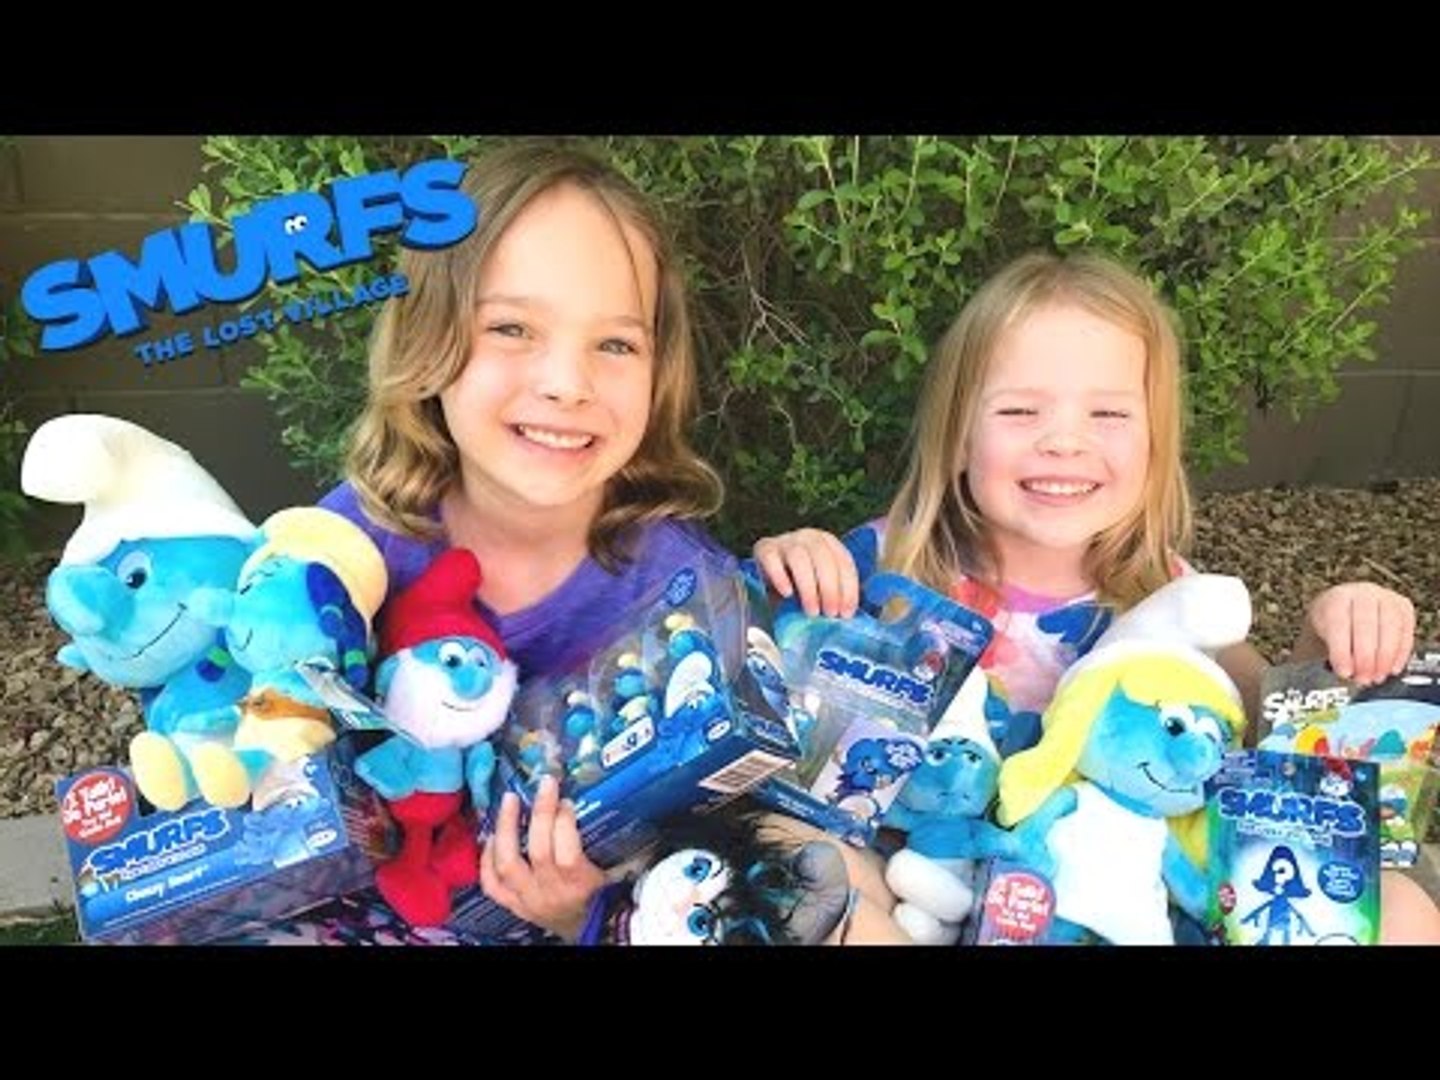 Smurfs Lost Village Toy Haul Hunt - NEW Toys from 2017 Movie w/ Addy & Maya  - video Dailymotion